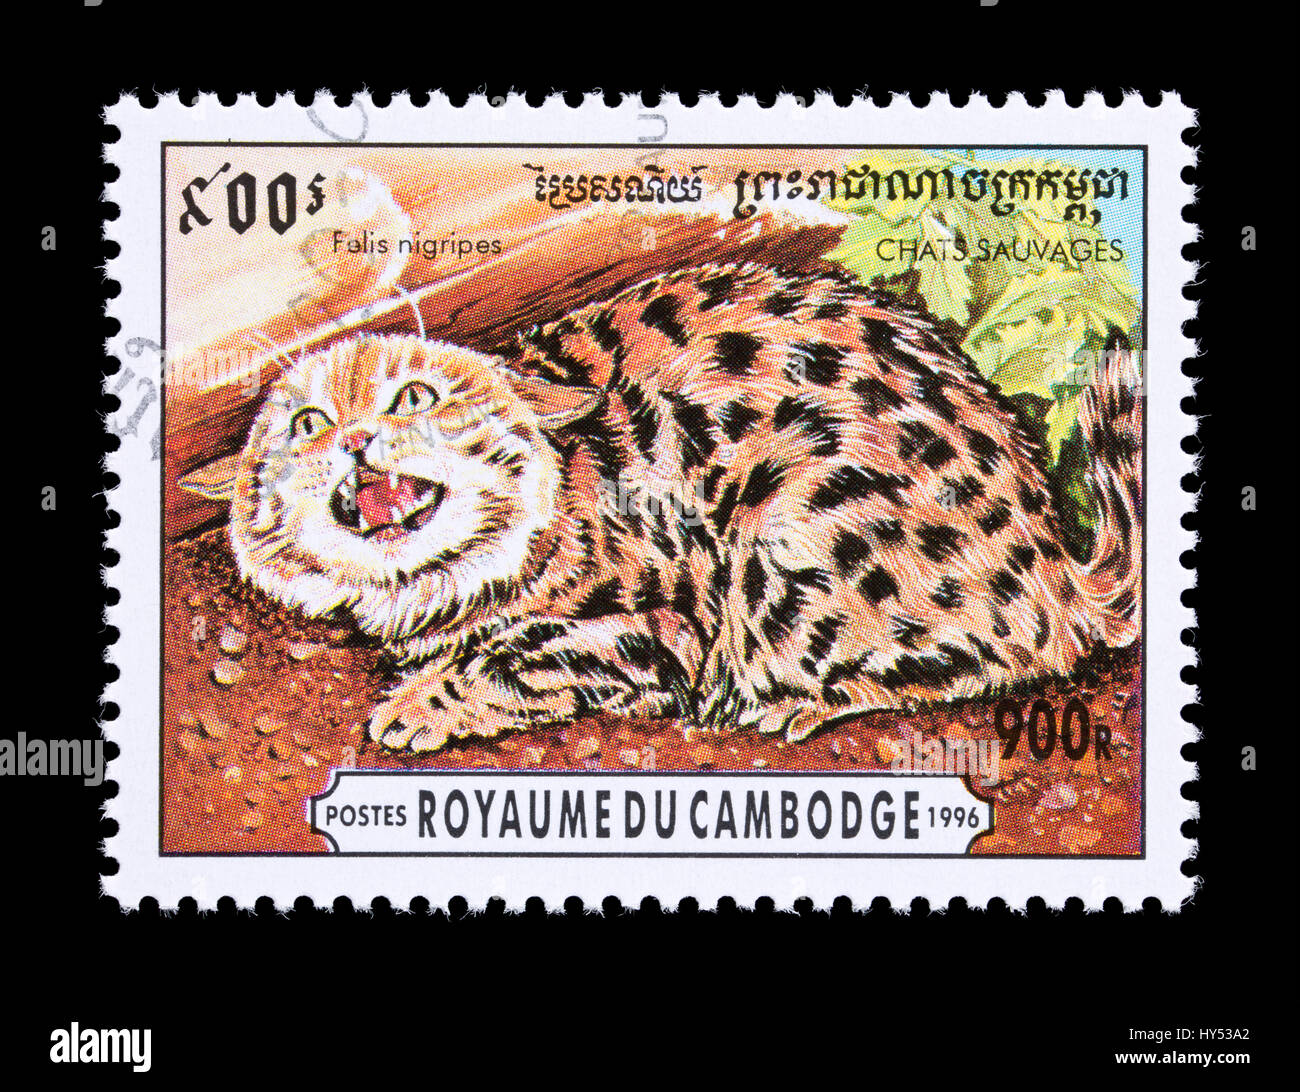 Postage stamp from Cambodia depicting a black-footed cat (Felis nigripes) Stock Photo